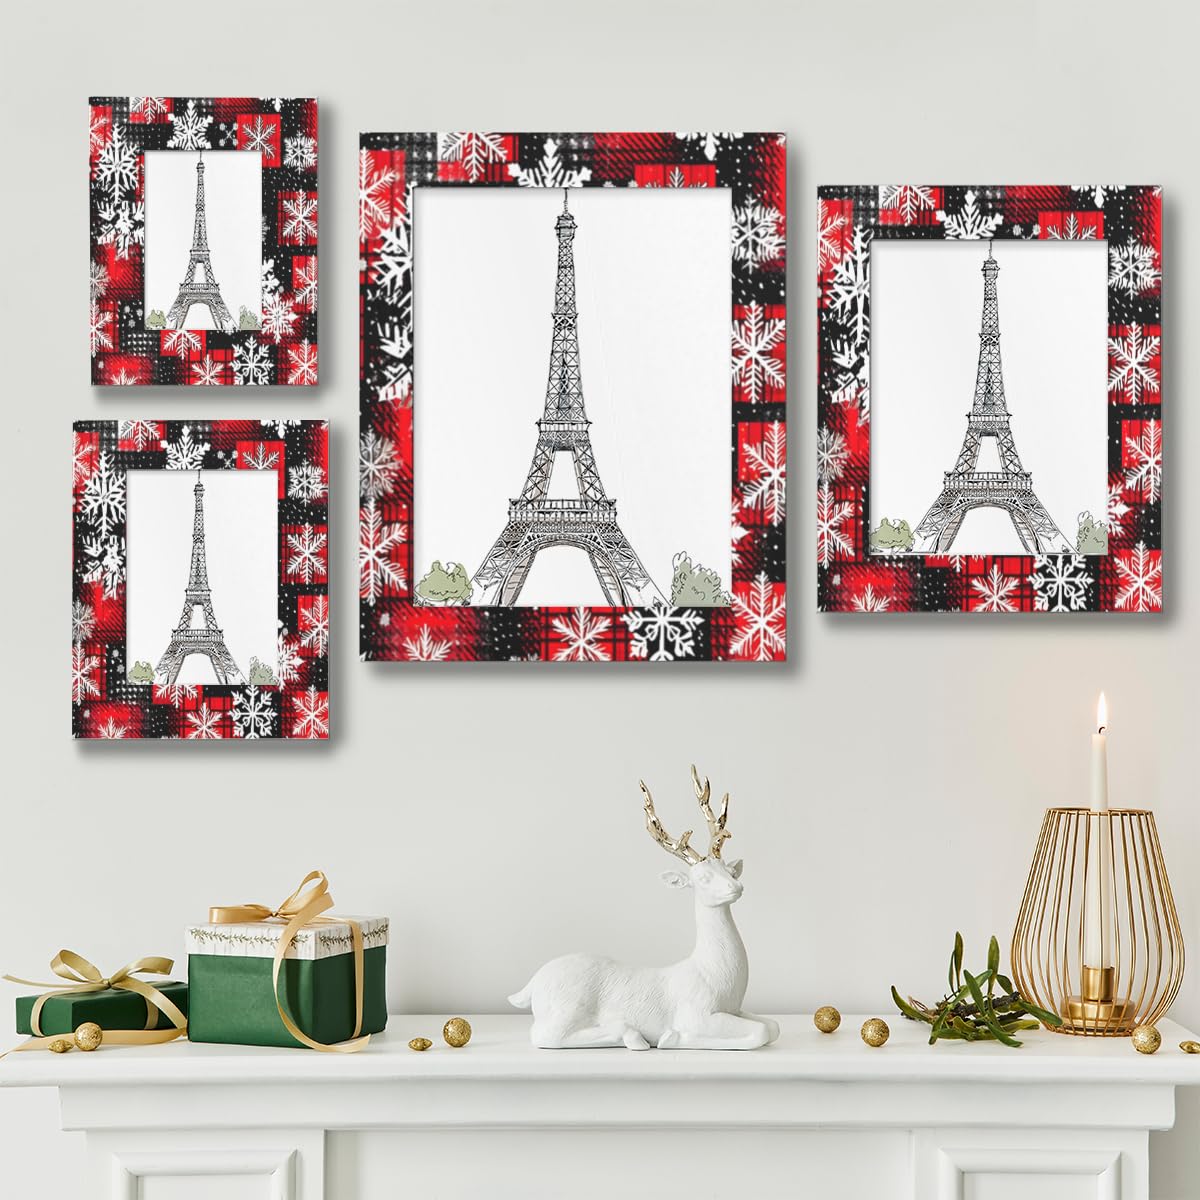 ADTASU 11x14 Picture Frame Wooden Snowflake Red Plaid Christmas Photo Frames for Wall Hanging Photo Frame,Tabletop Display Home Decorative